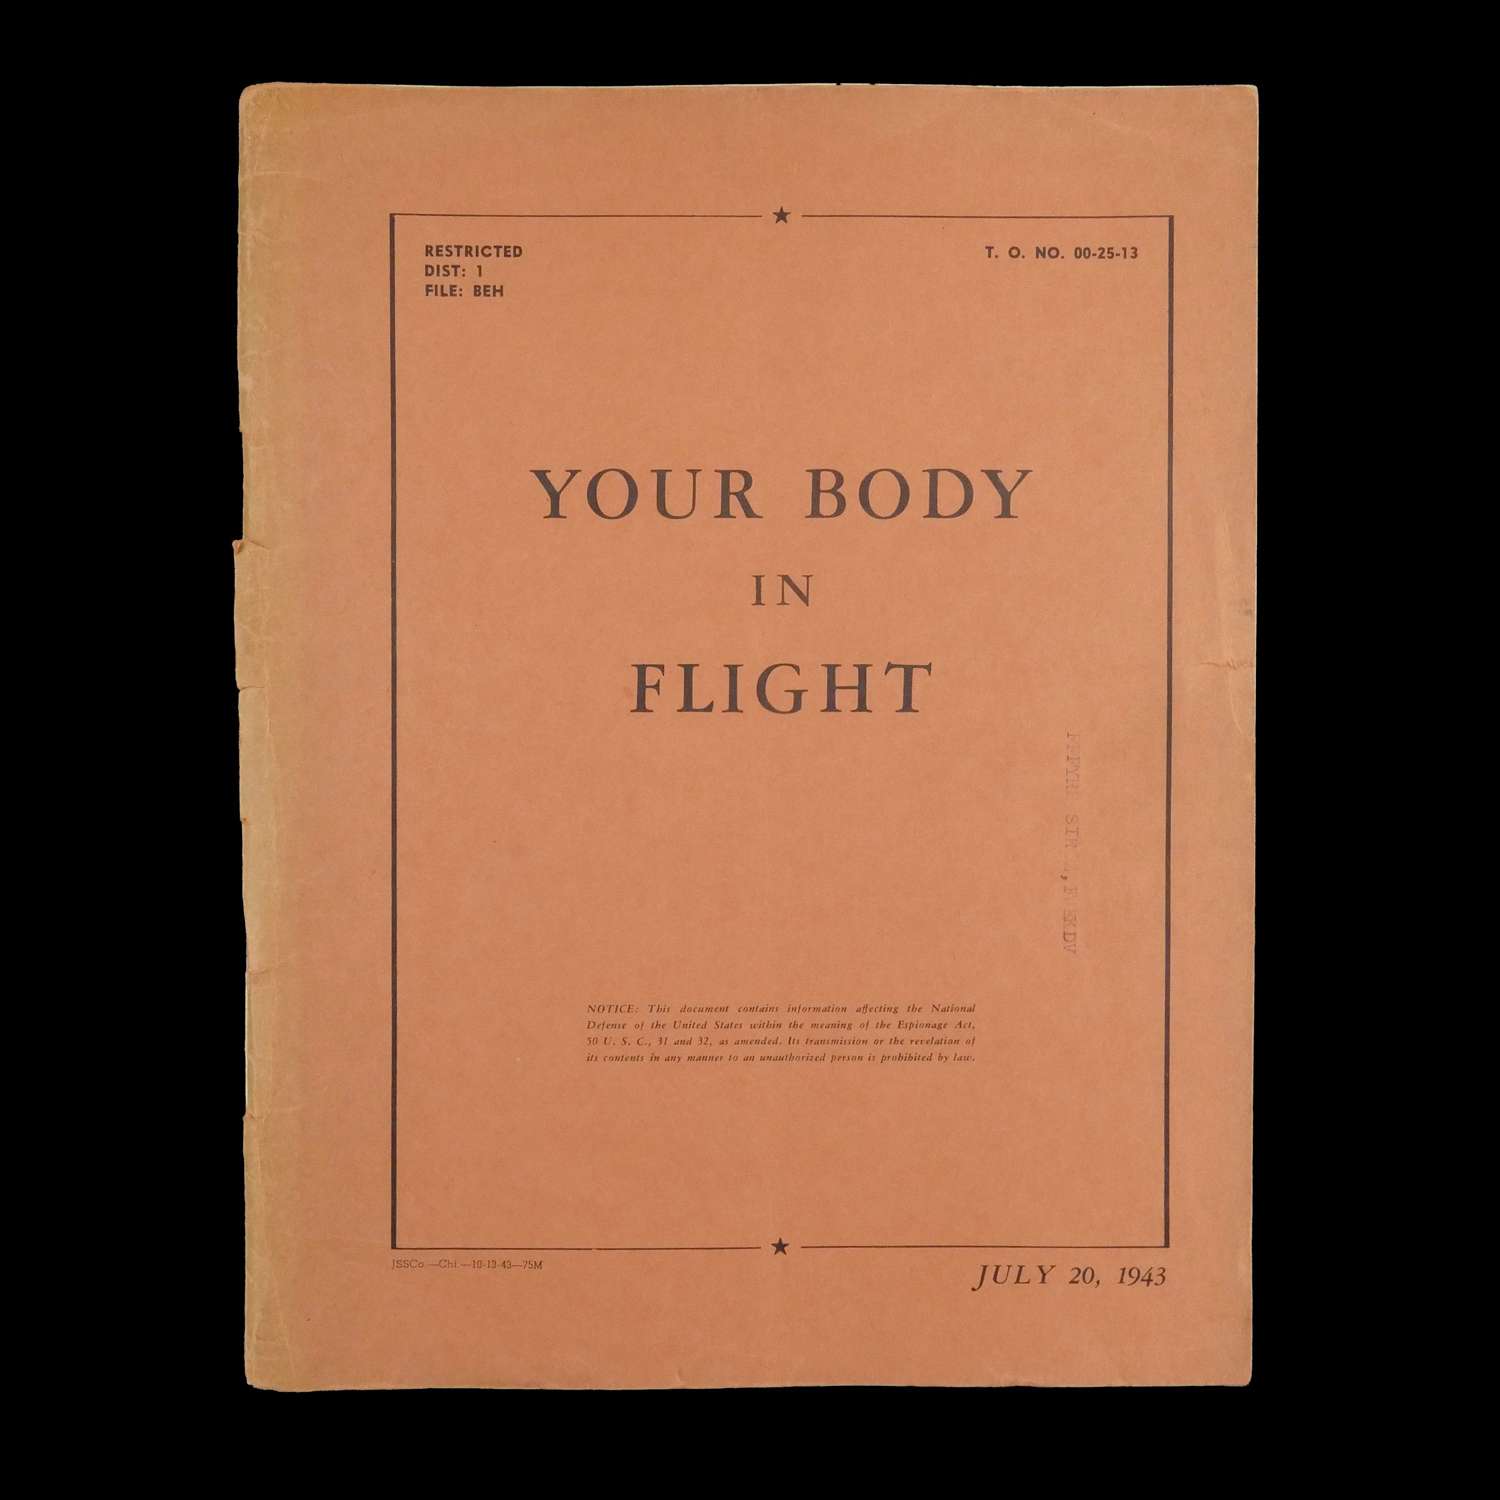 USAAF - Your Body in Flight, 1943